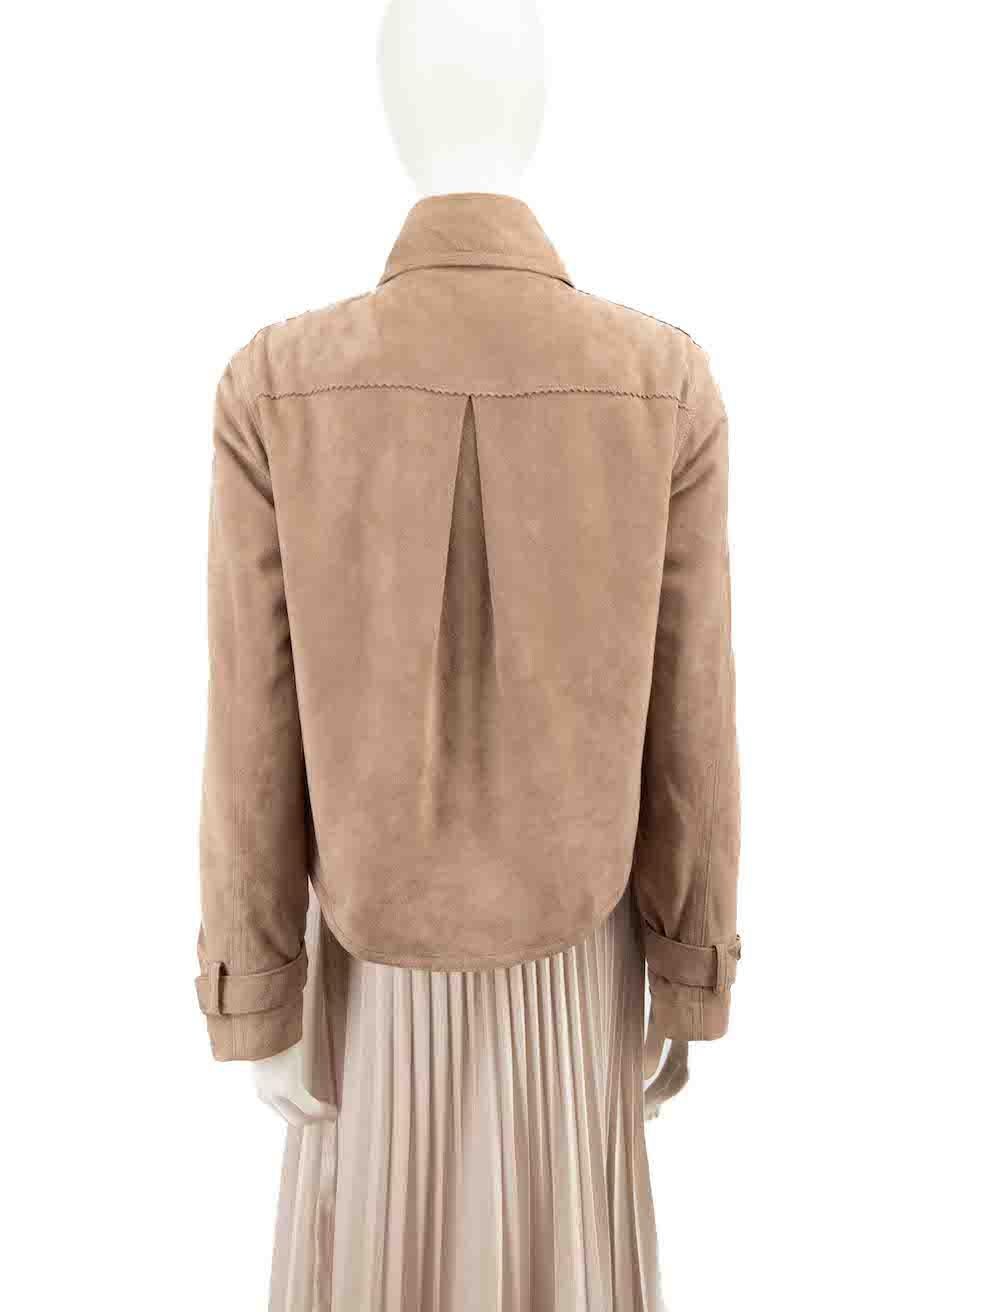 J.Mendel Brown Suede High Low Cropped Jacket Size S In Good Condition For Sale In London, GB